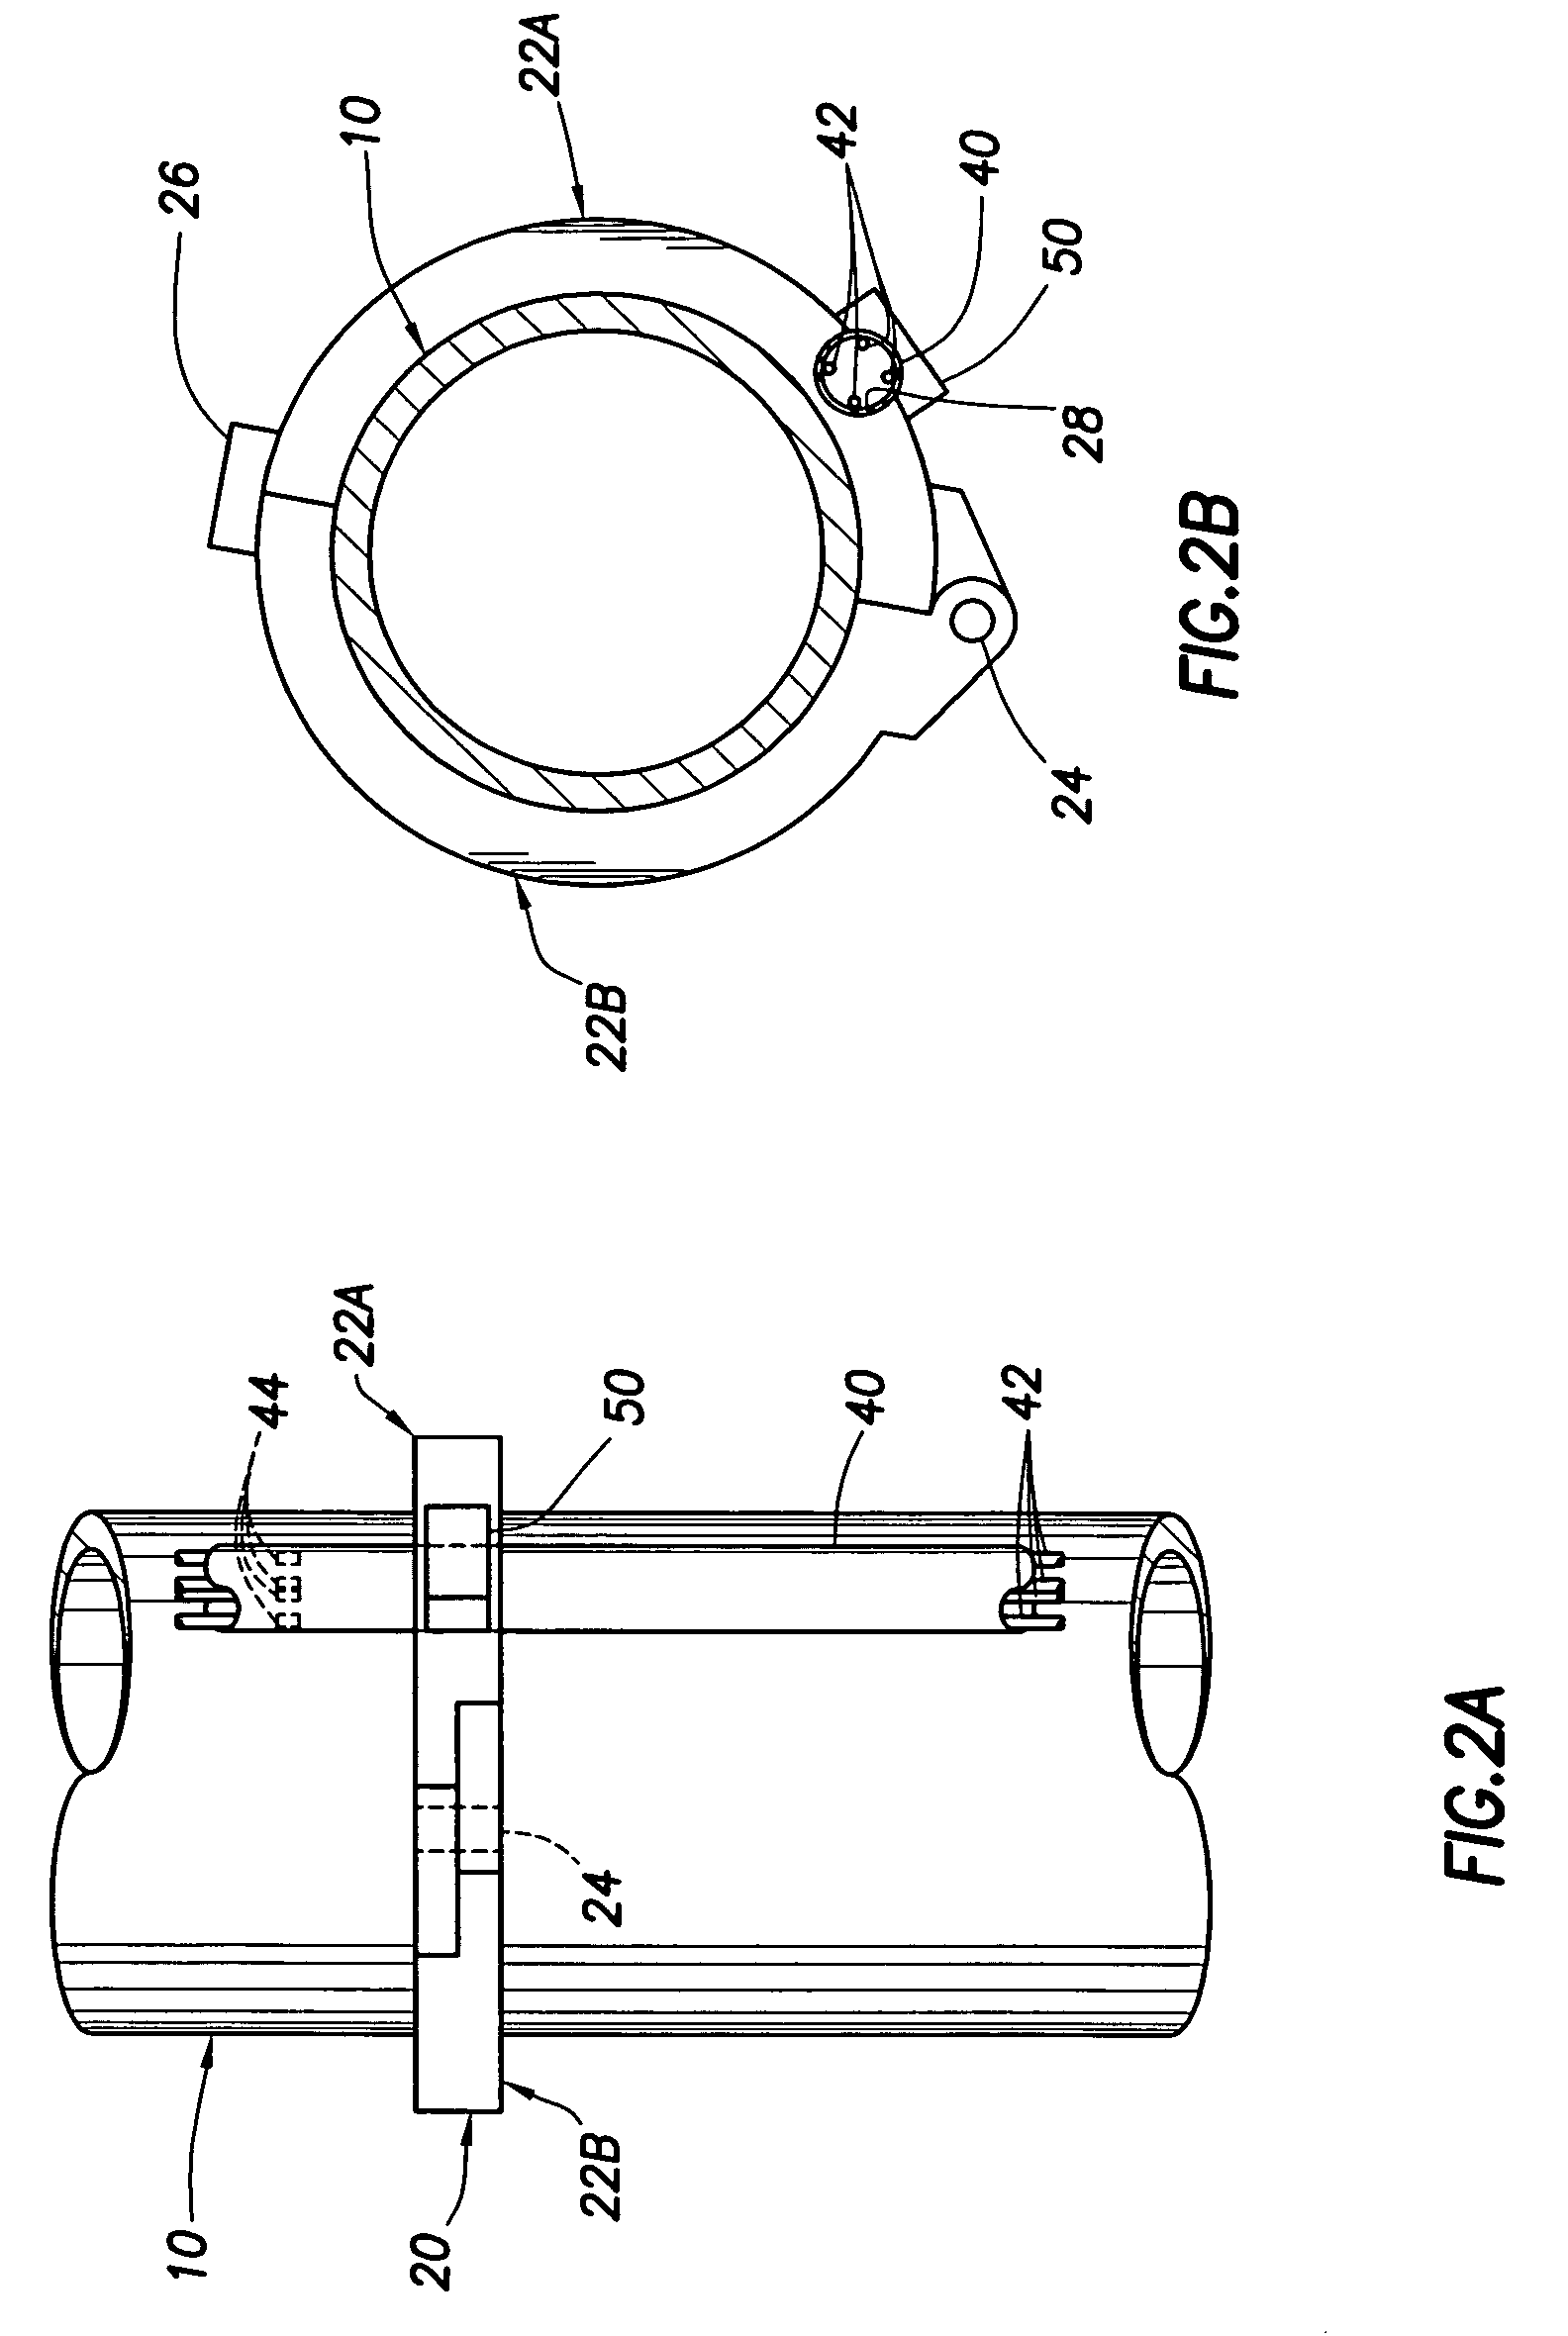 Apparatus and method for retroactively installing sensors on marine elements